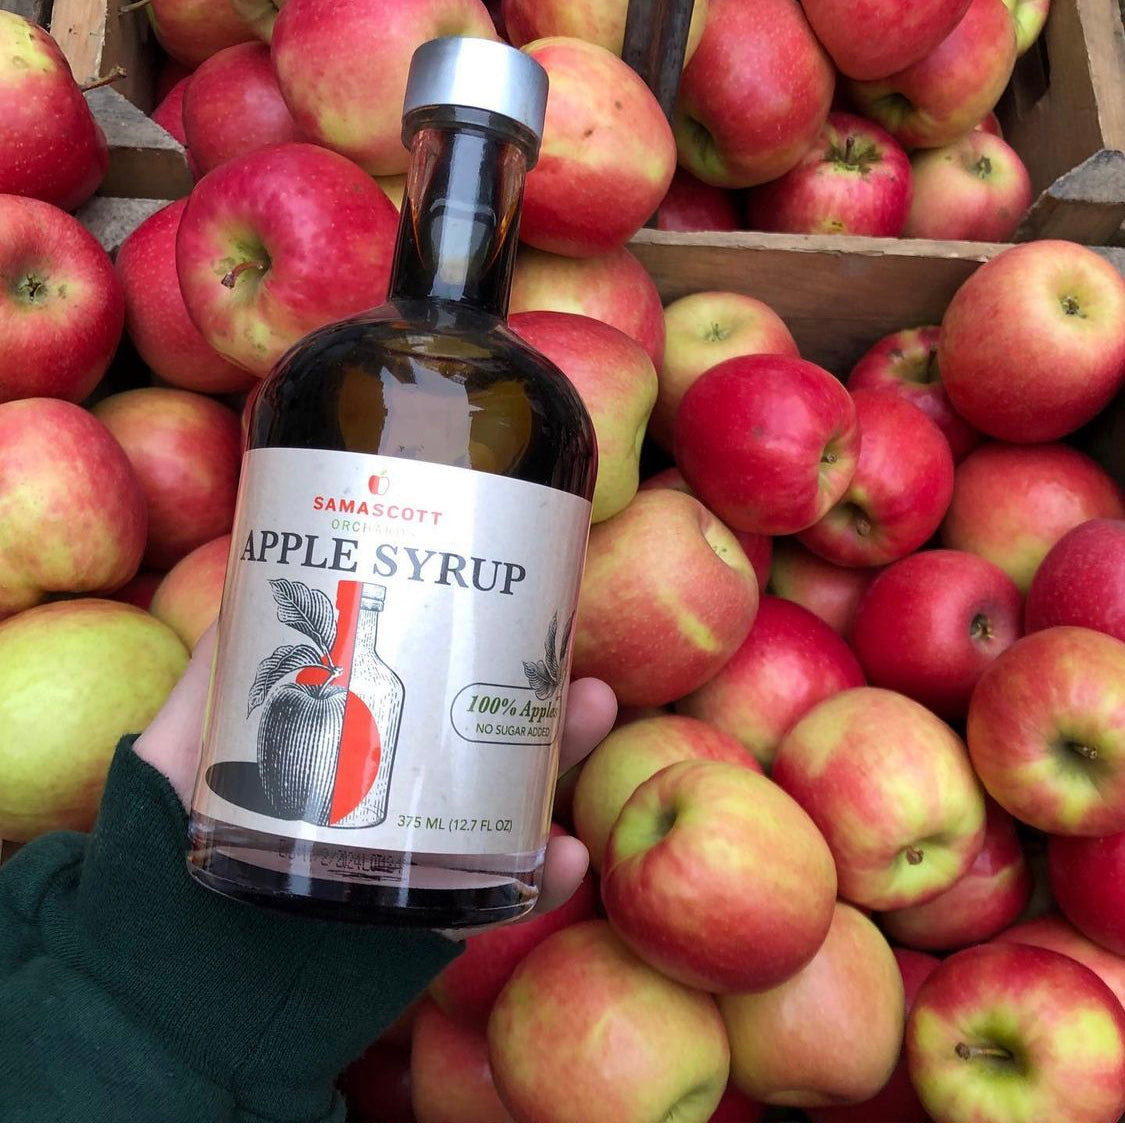 Apple Syrup, 2-pack